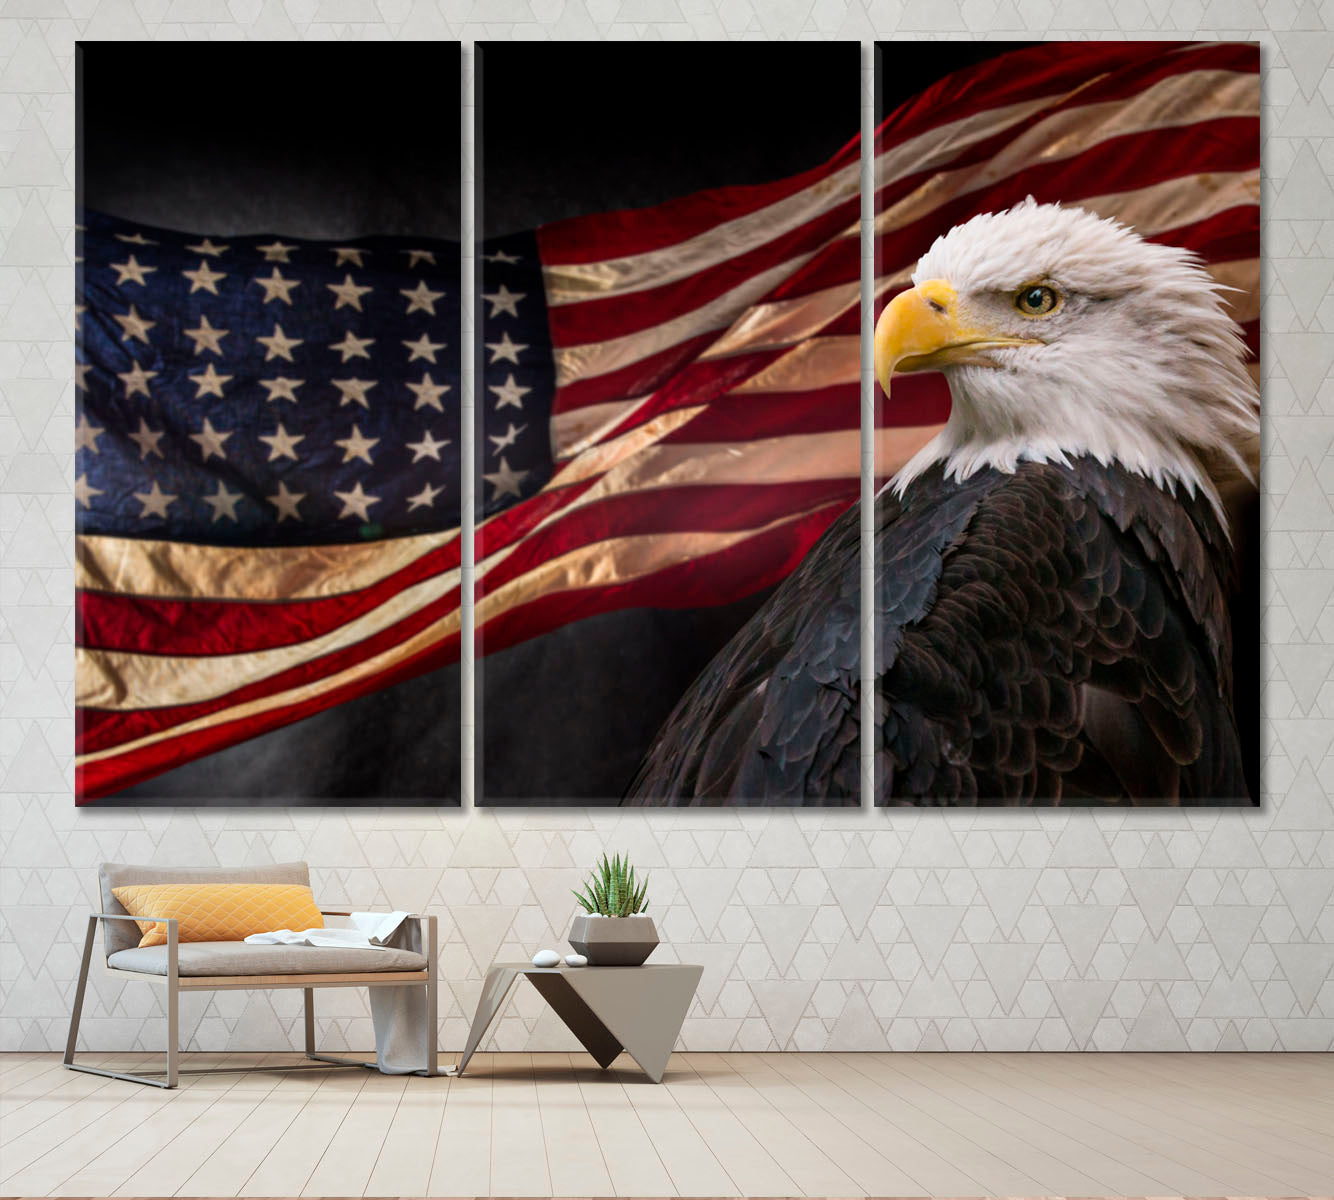 Powerful America Patriotic Symbols Bald Eagle Poster Posters, Flags Giclee Print Artesty 3 panels 36" x 24" 